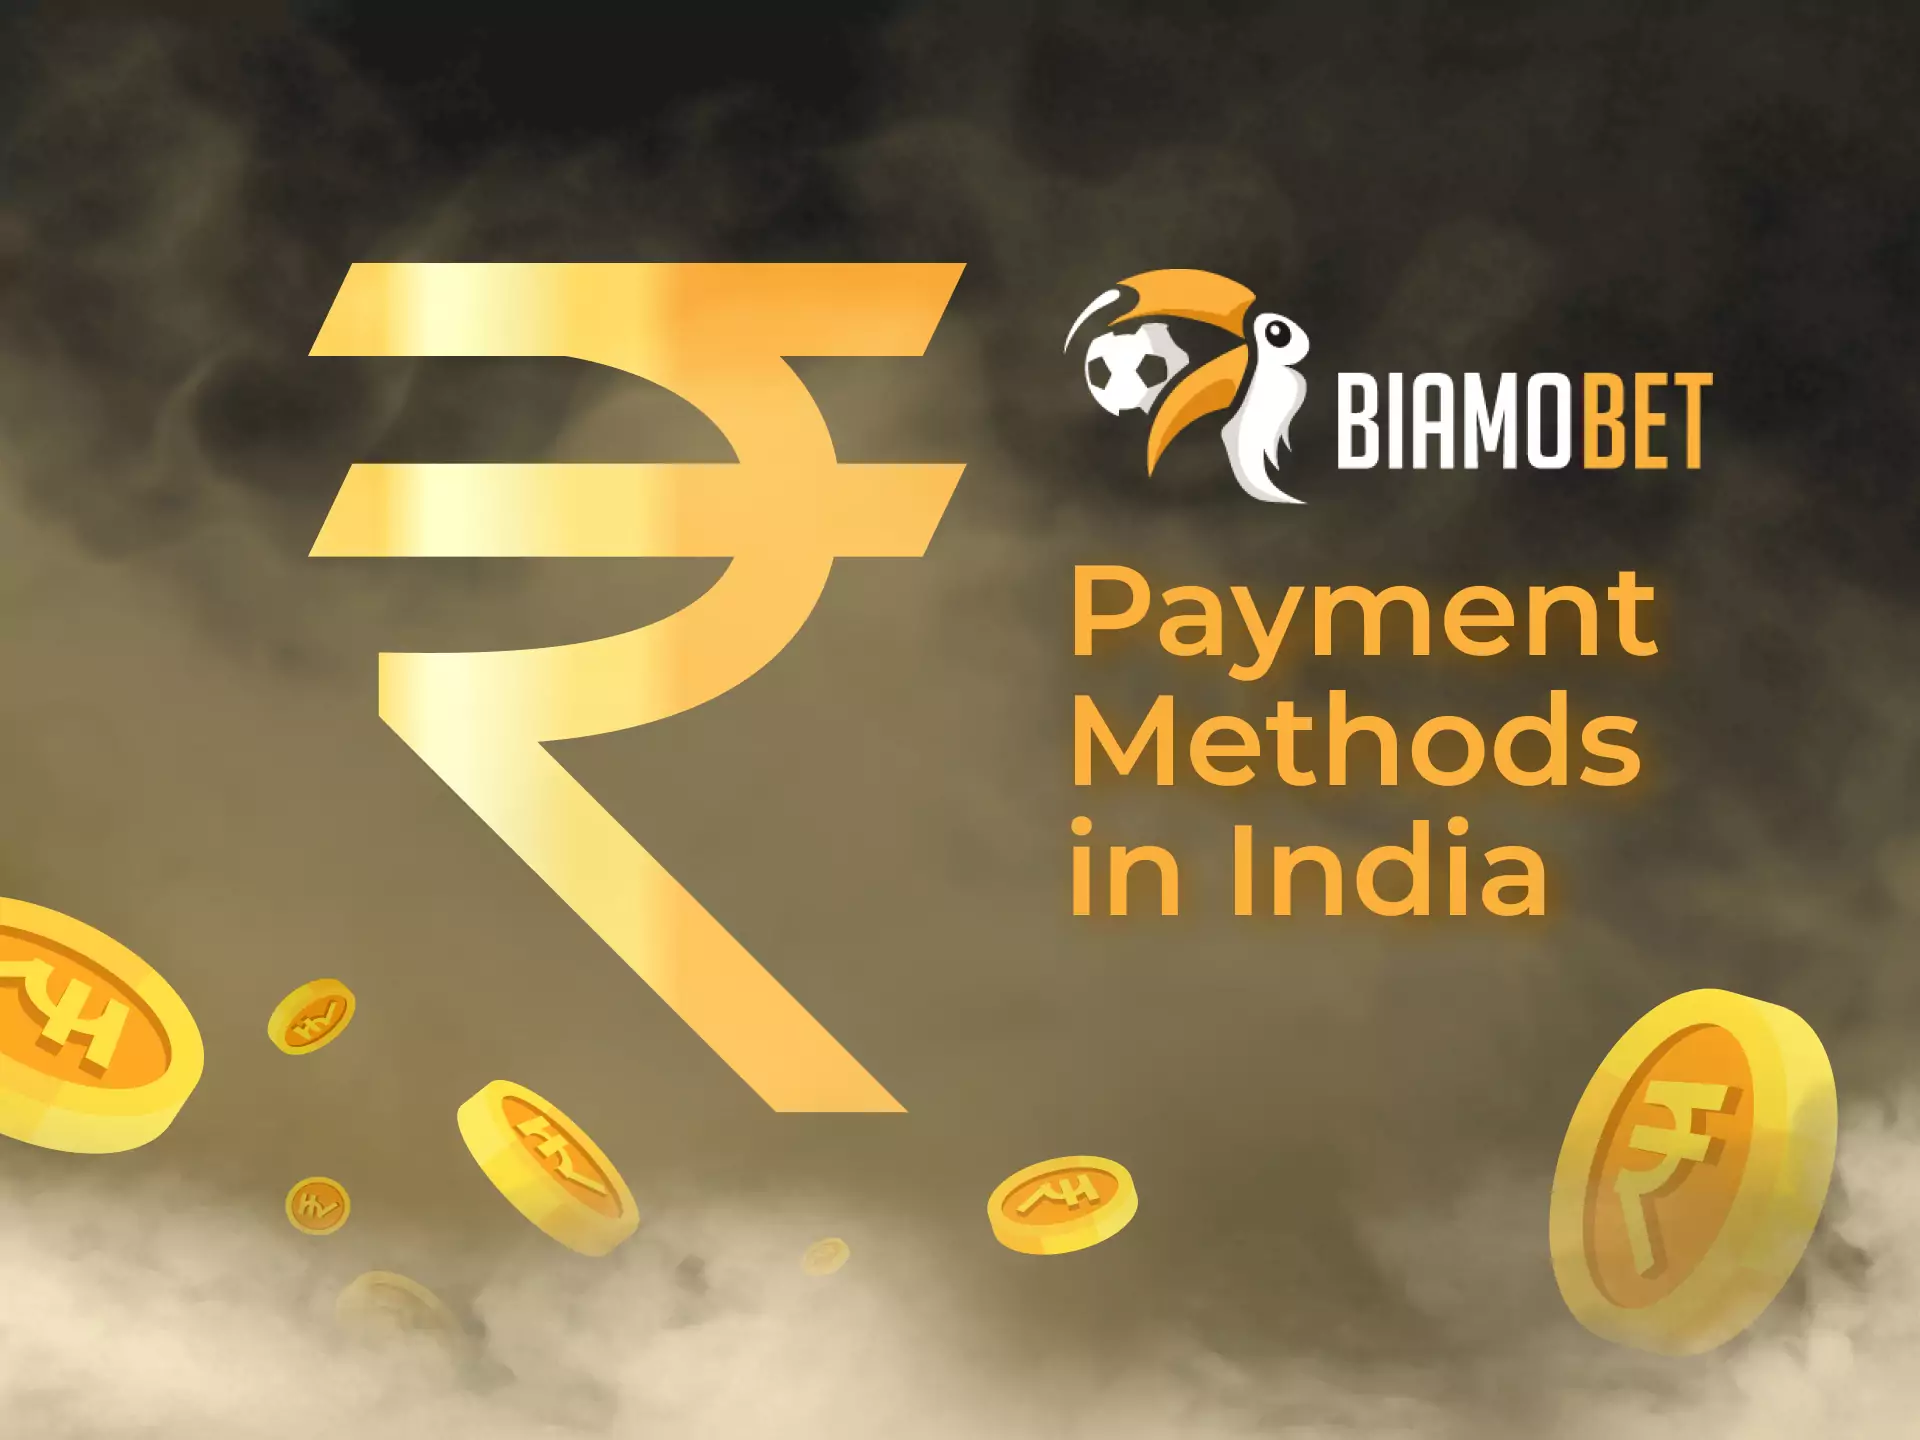 In the Biamobet account, you can deposit and withdraw money with the help of Indian payment systems.